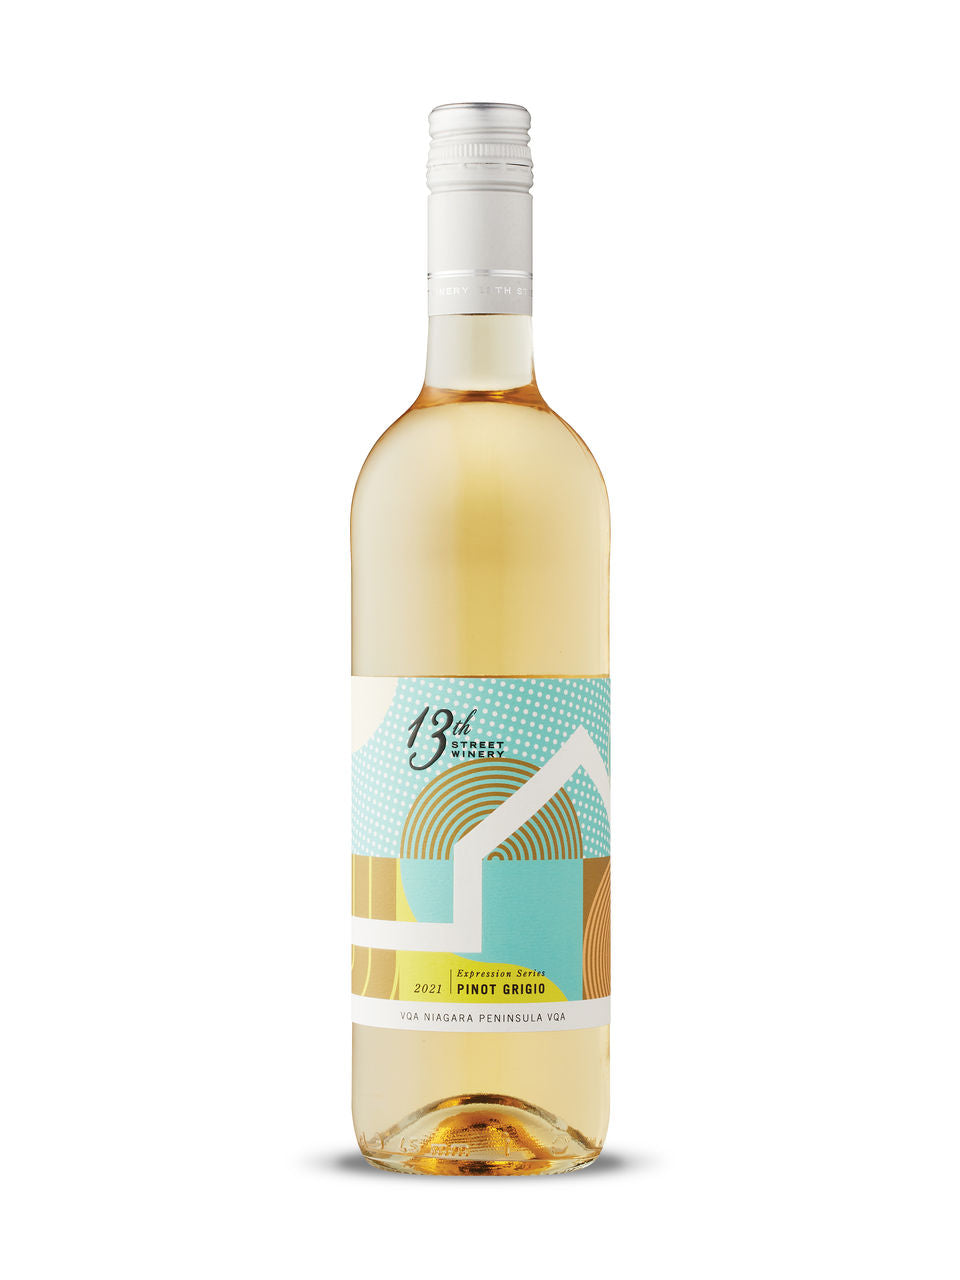 13th Street Expression Series Pinot Grigio 2020 750 mL Bottle VINTAGES